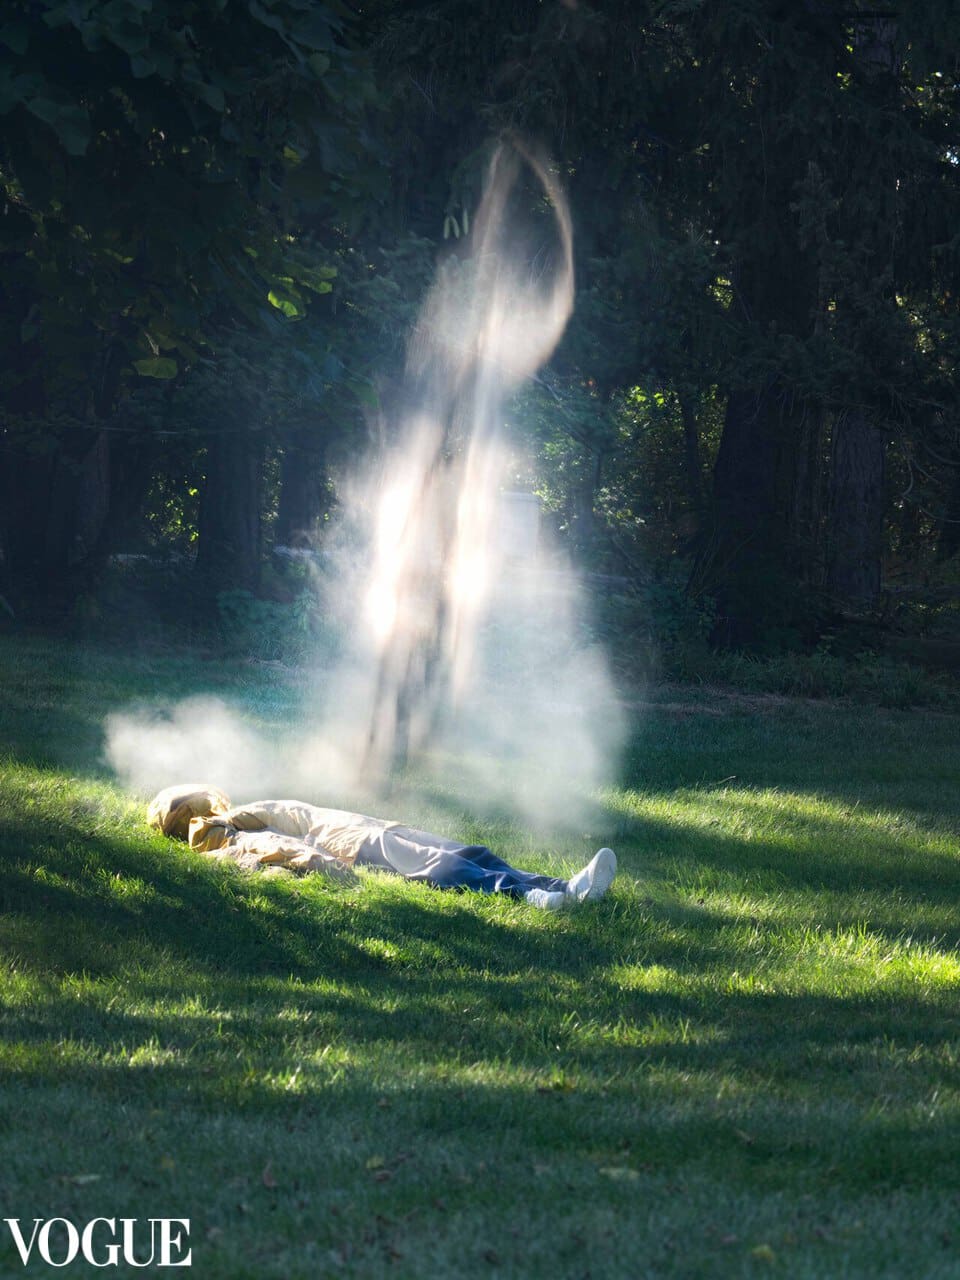 A person laying down in a lush meadow with a waterfall